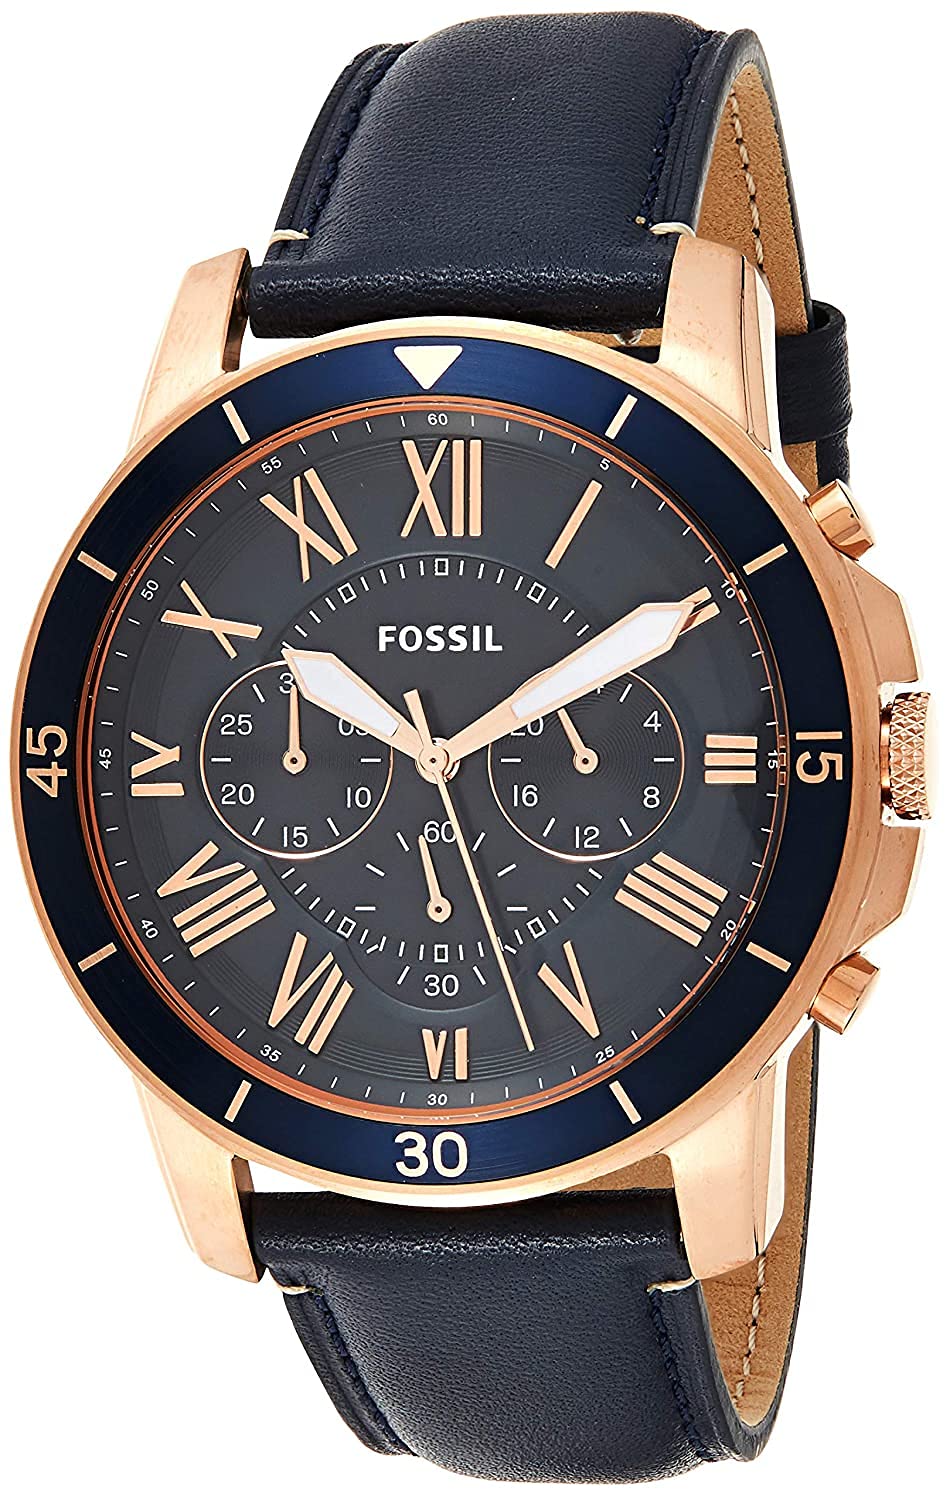 Fossil Men's Grant Sport Stainless Steel and Leather Chronograph Quartz Watch